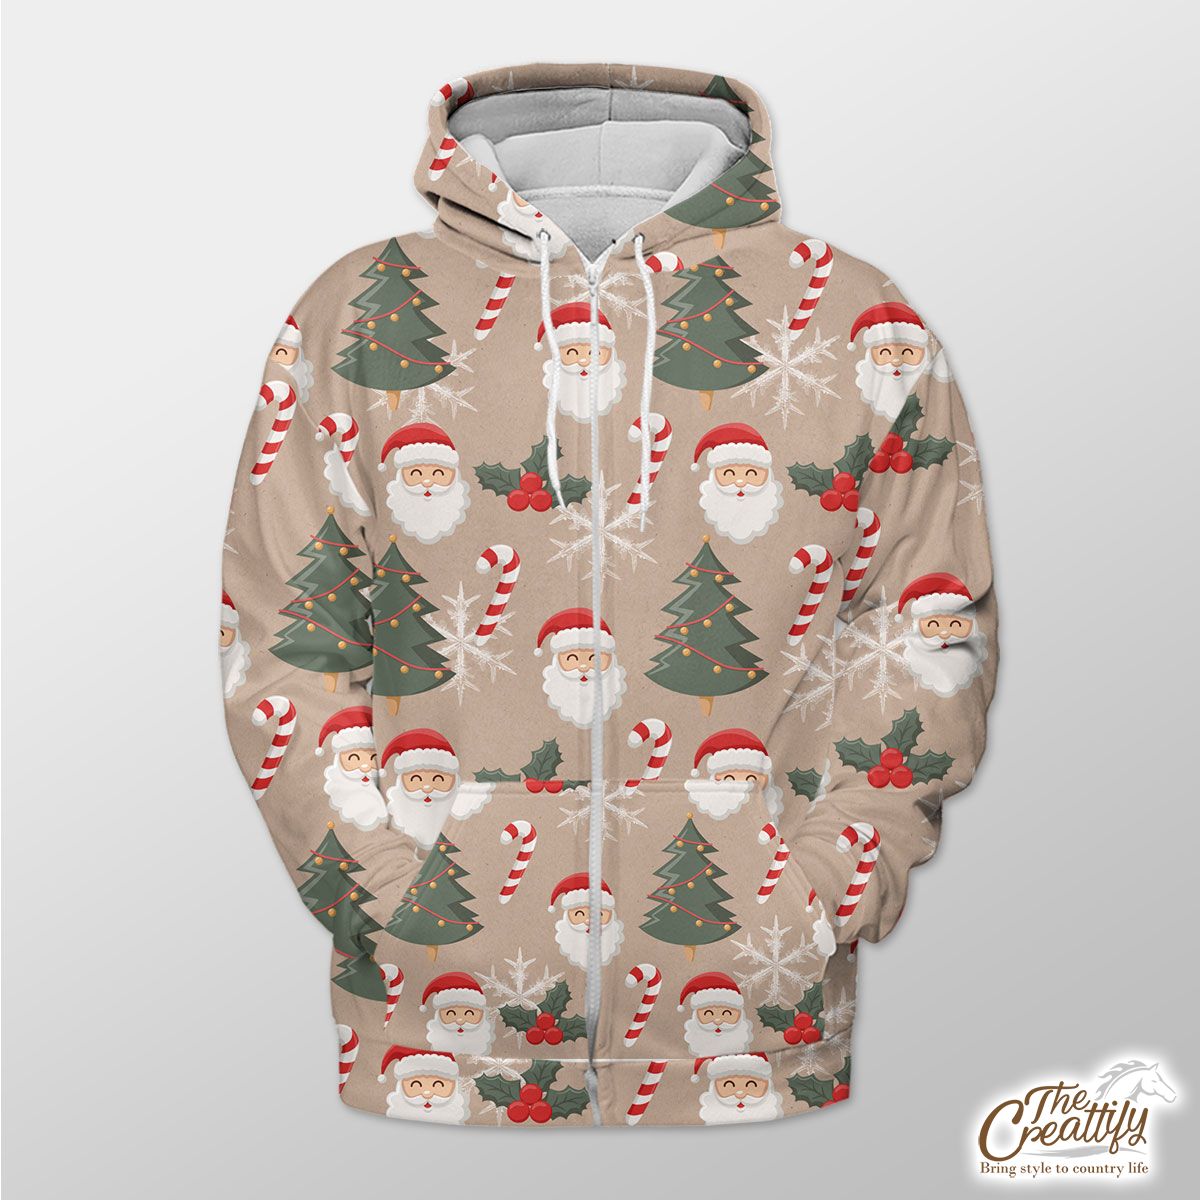 Santa Clause, Christmas Tree, Candy Cane, Holly Leaf On Snowflake Background Zip Hoodie